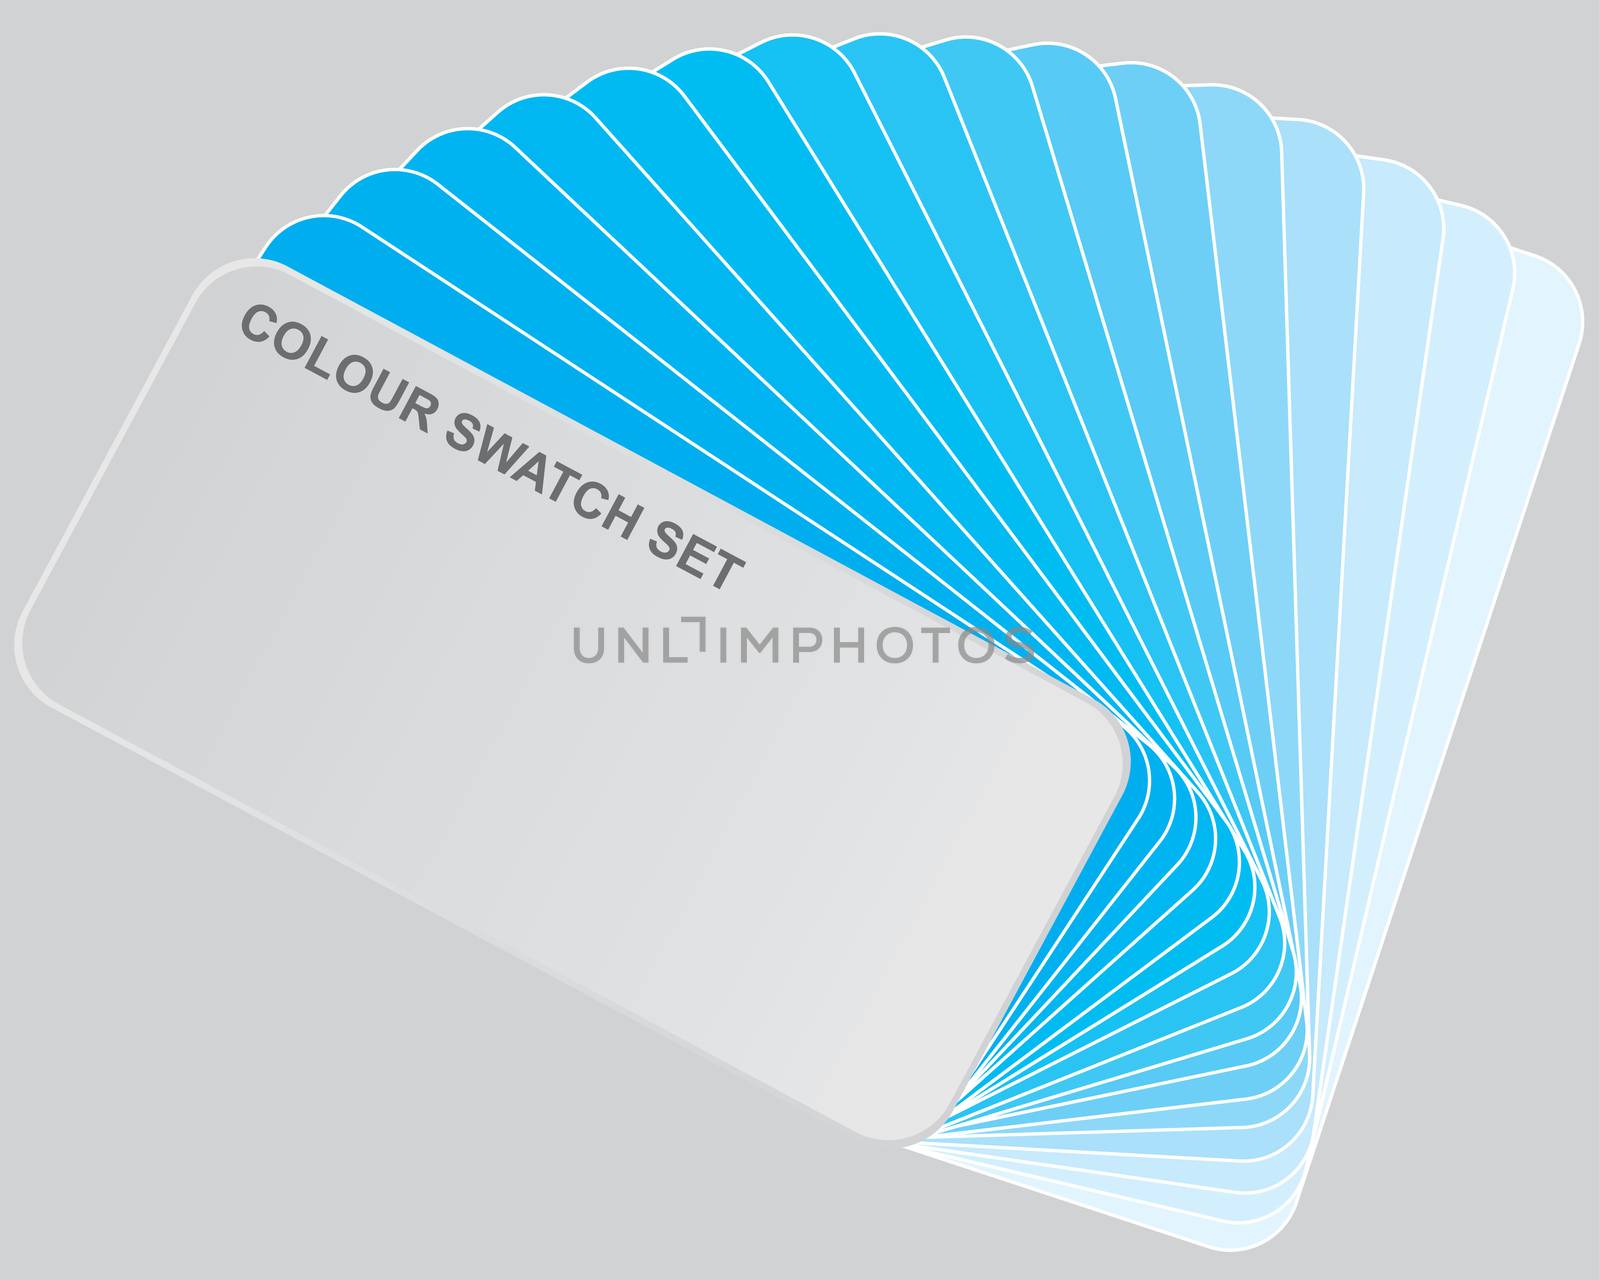 Colour guide by DragonEyeMedia